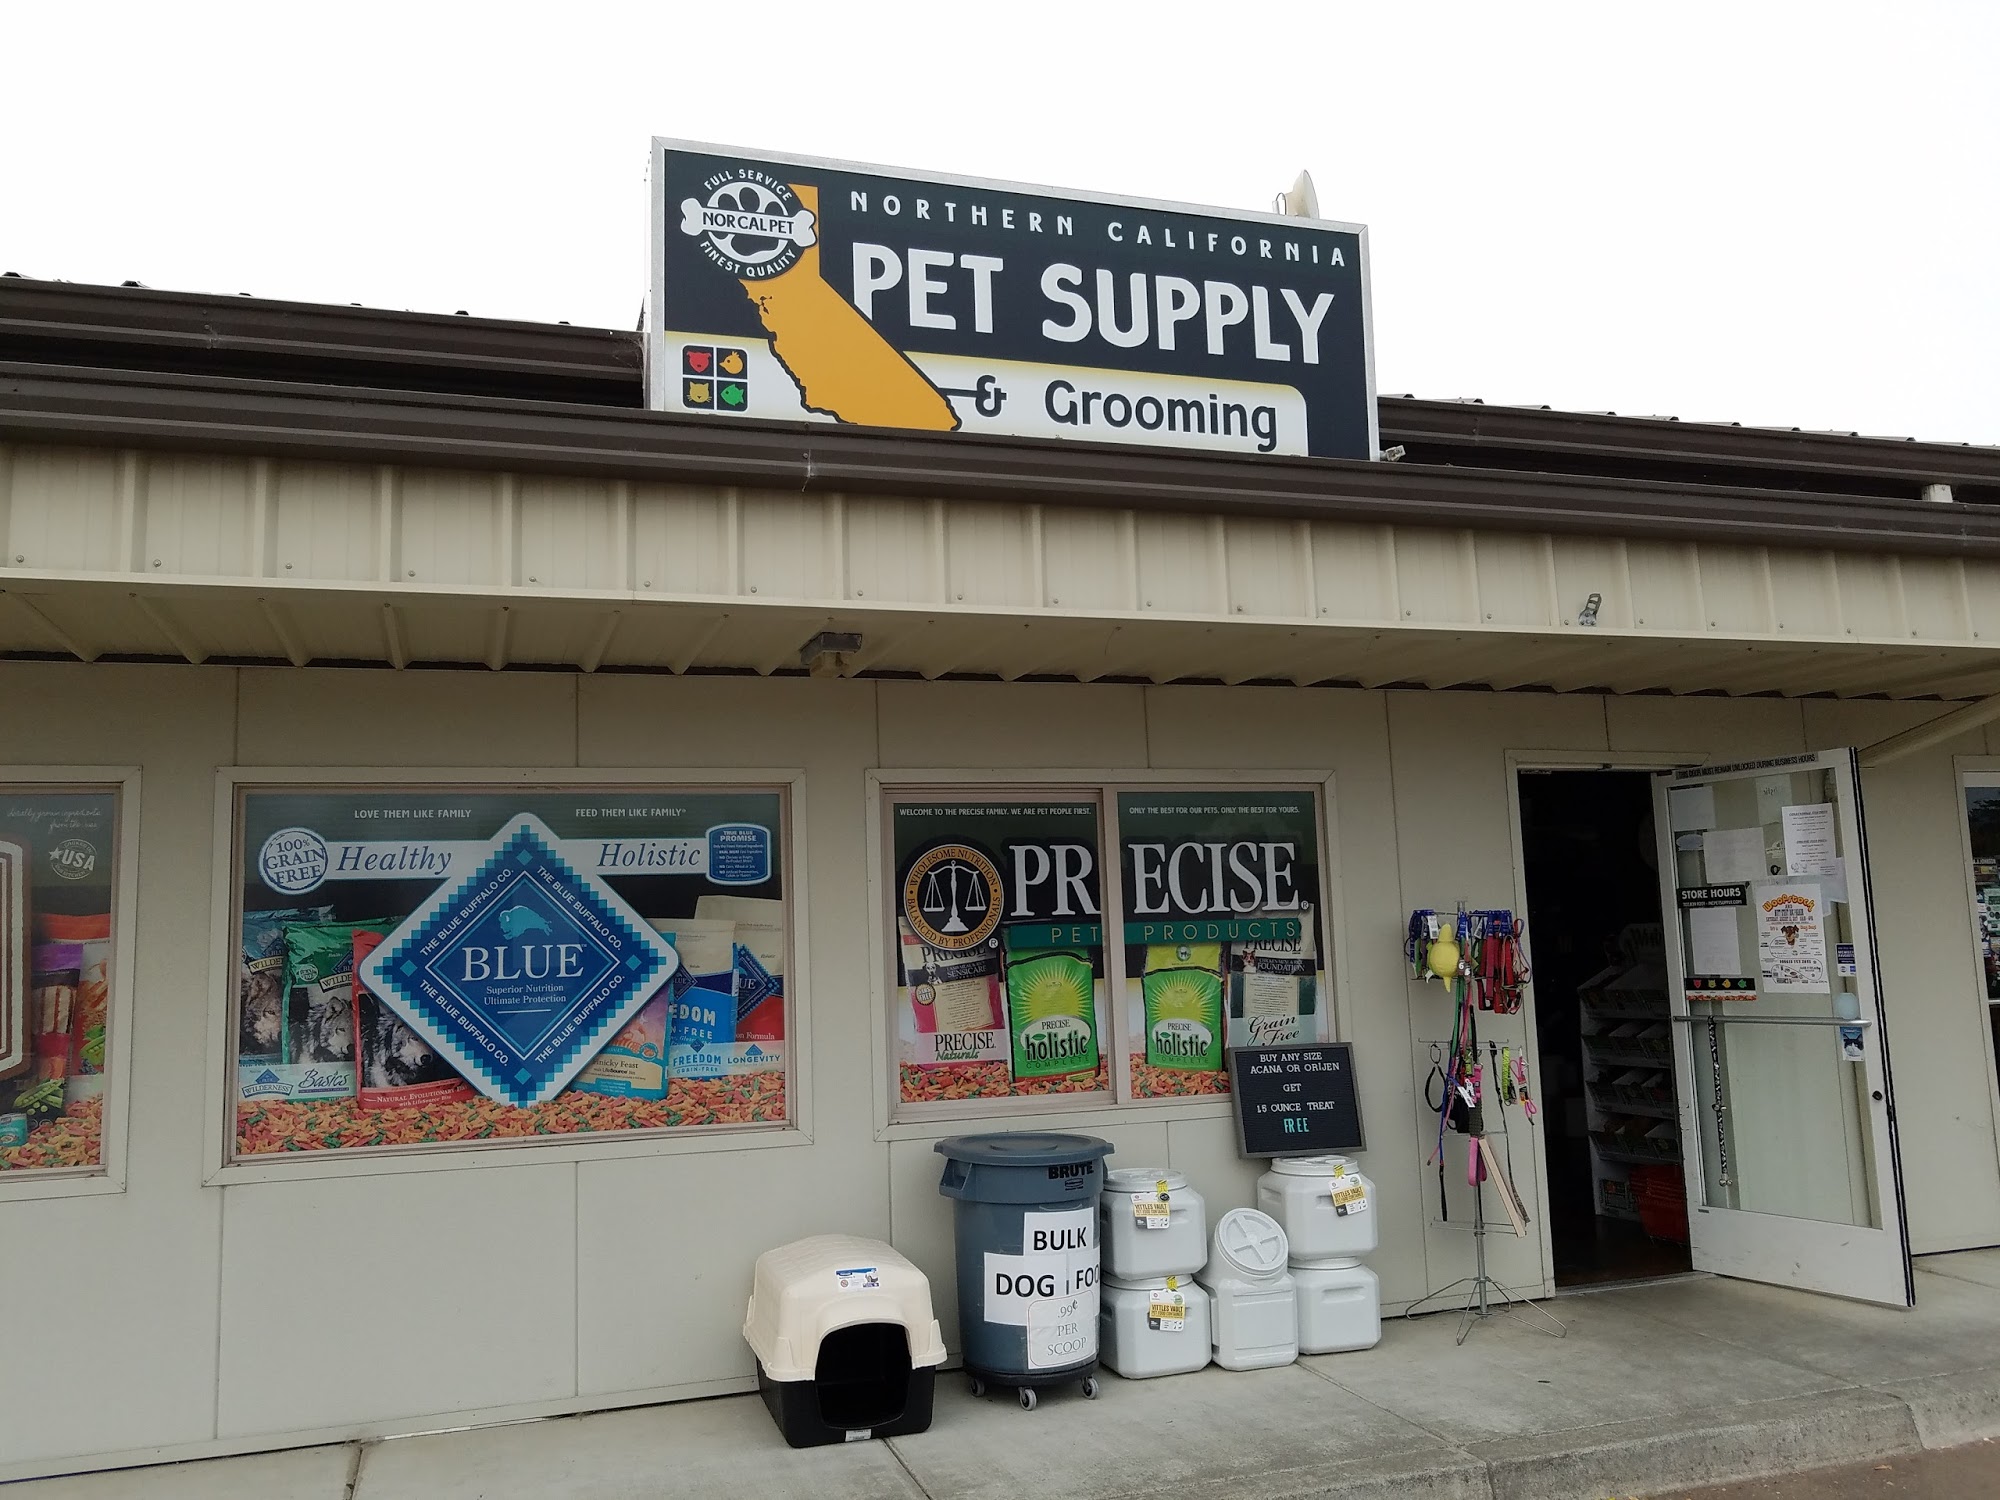 Northern California Pet Supply and Grooming